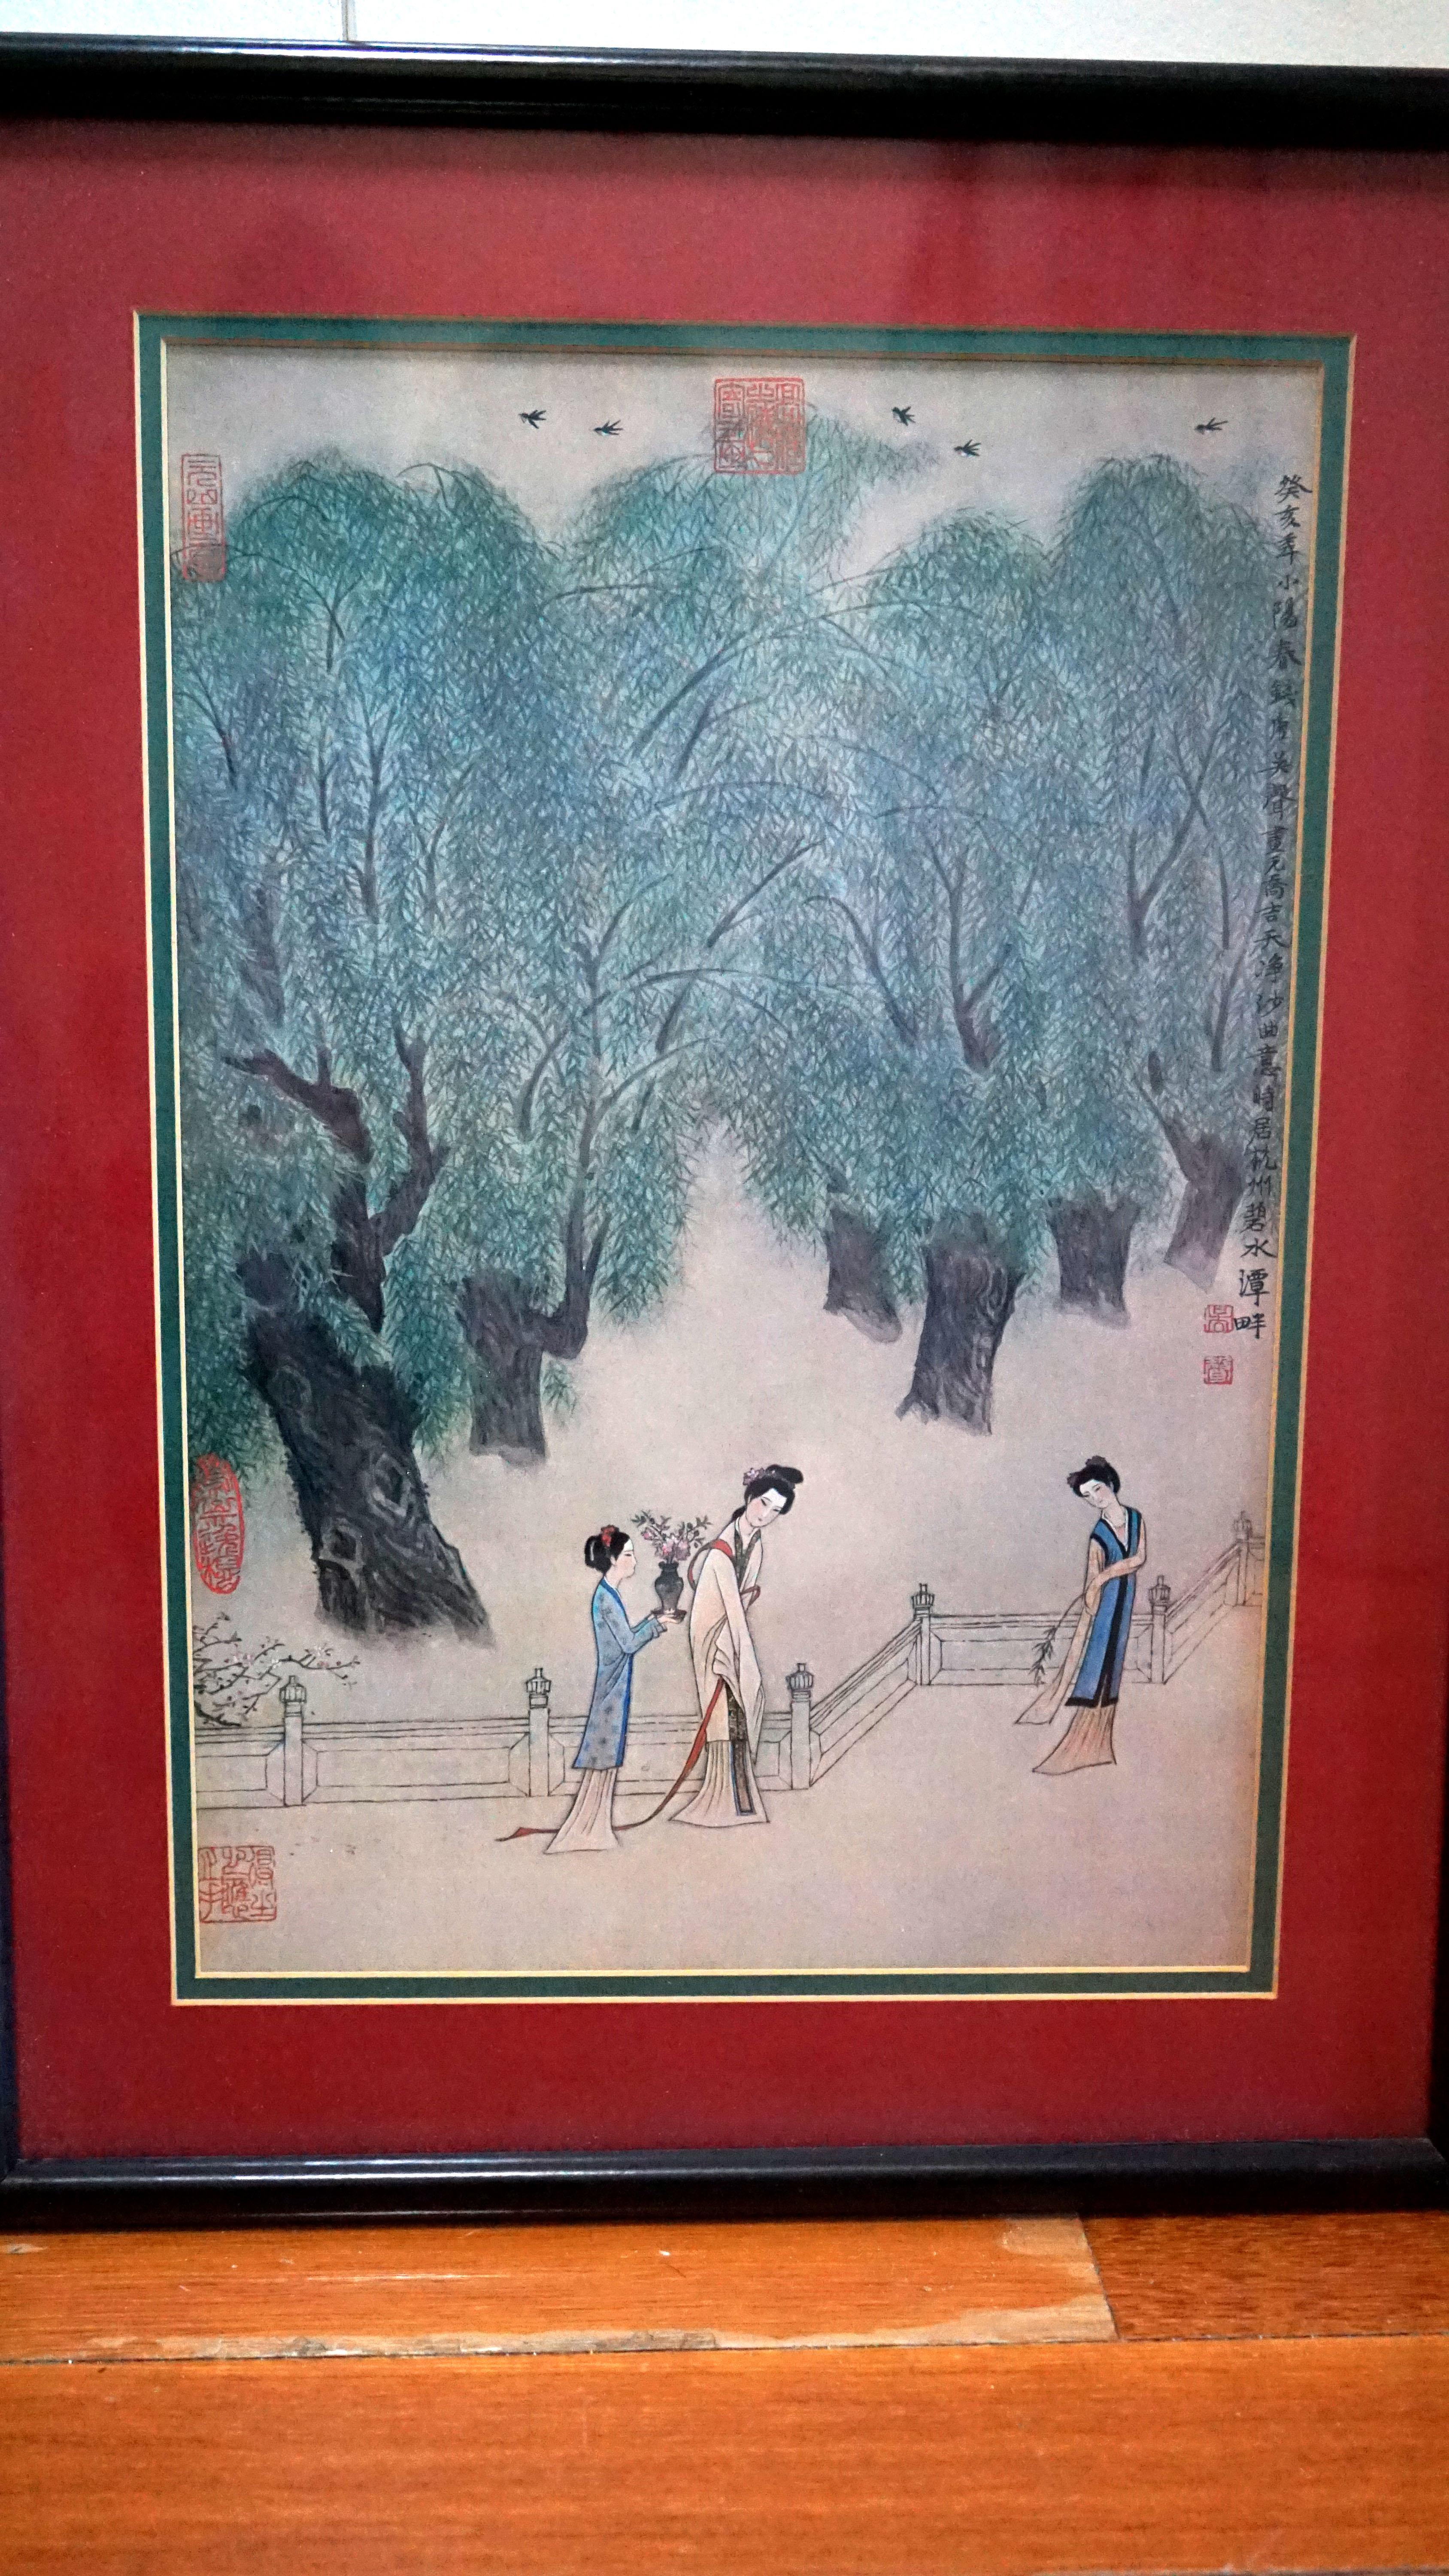 These are two paintings depicting figures in a natural landscape setting among trees and other garden settings. The palette is pastel mixed with neutral tones. Based on the hairstyles and wardrobes, our appraiser says the works appear to be Chinese.